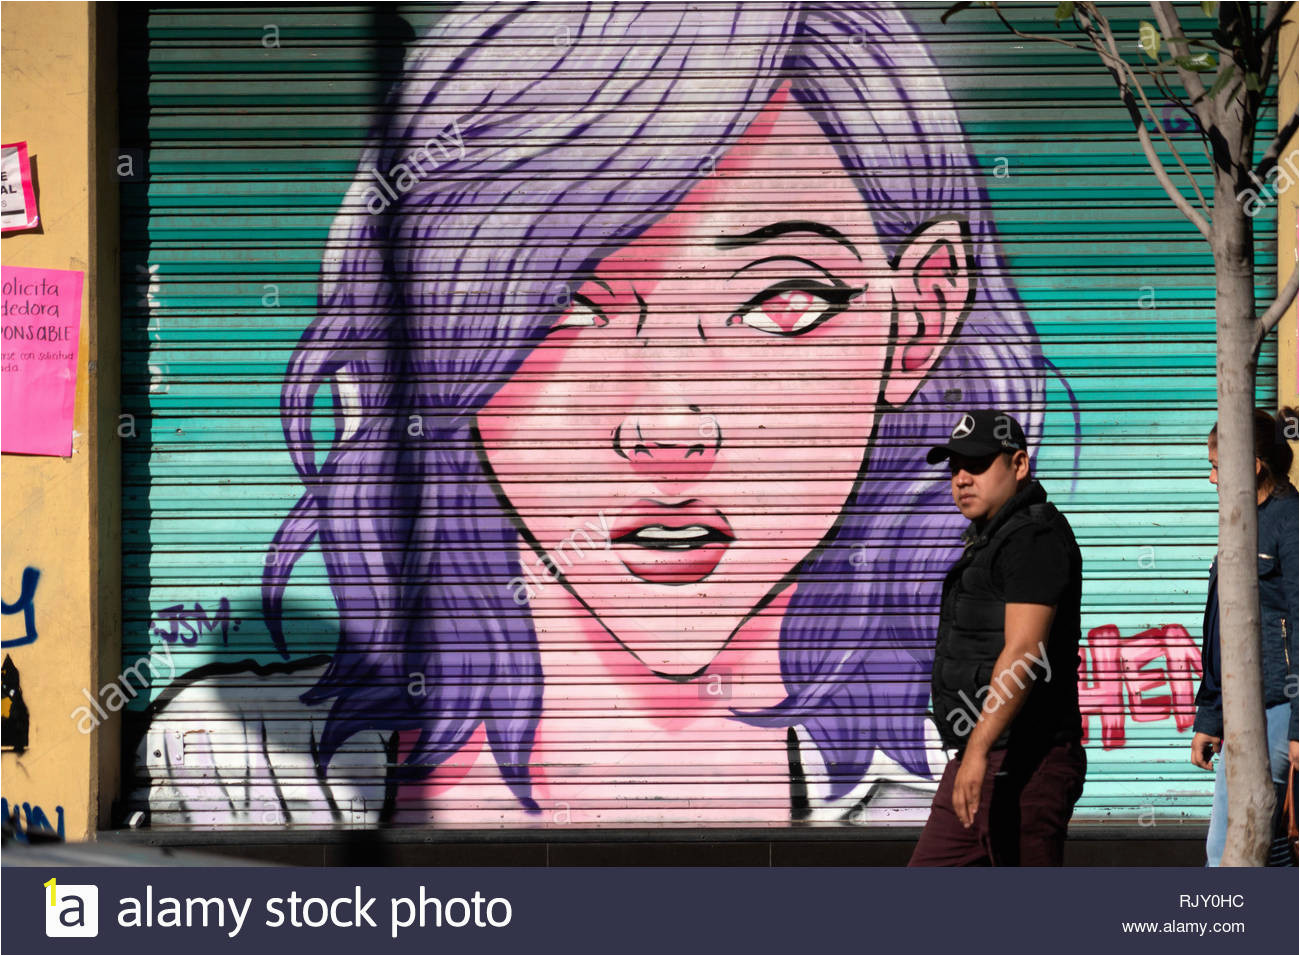 mexico city mexico january 30 2019 all the shops rolli down gates have graffiti in 20 november business street art is all over the capital and RJY0HC